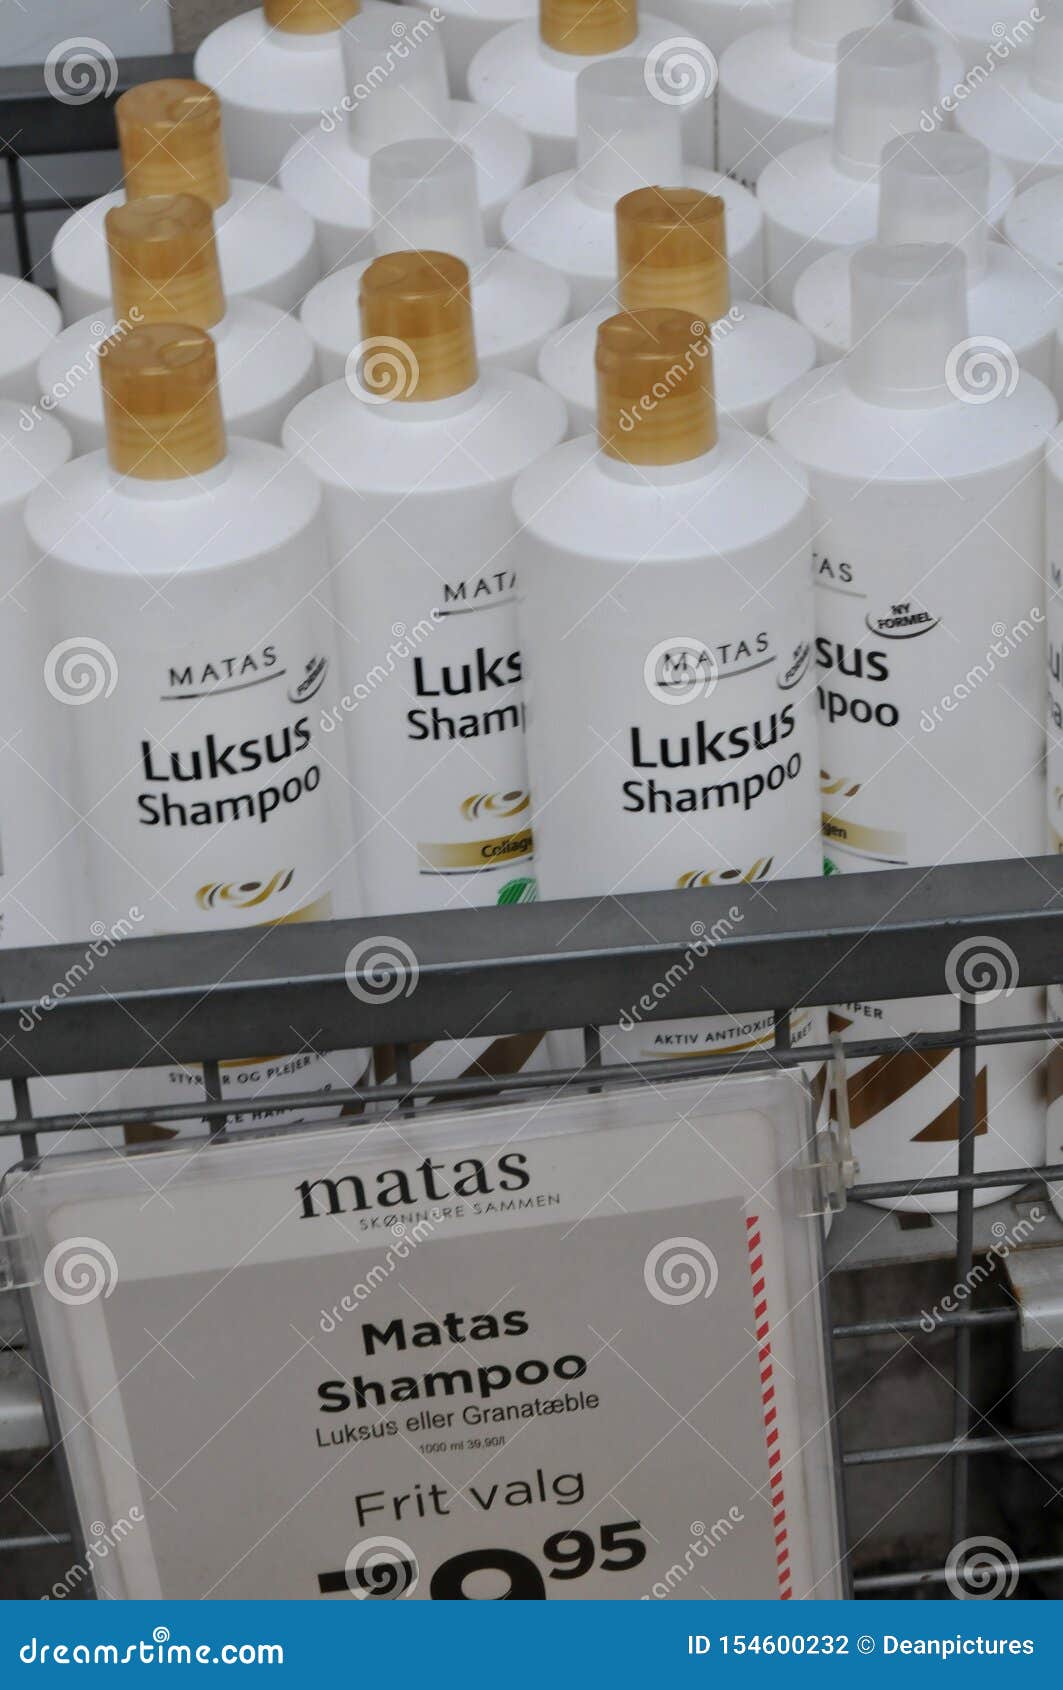 MATAS LUKSUS SHAMPOO in OTHER MATAS Editorial Photography - Image of commerce: